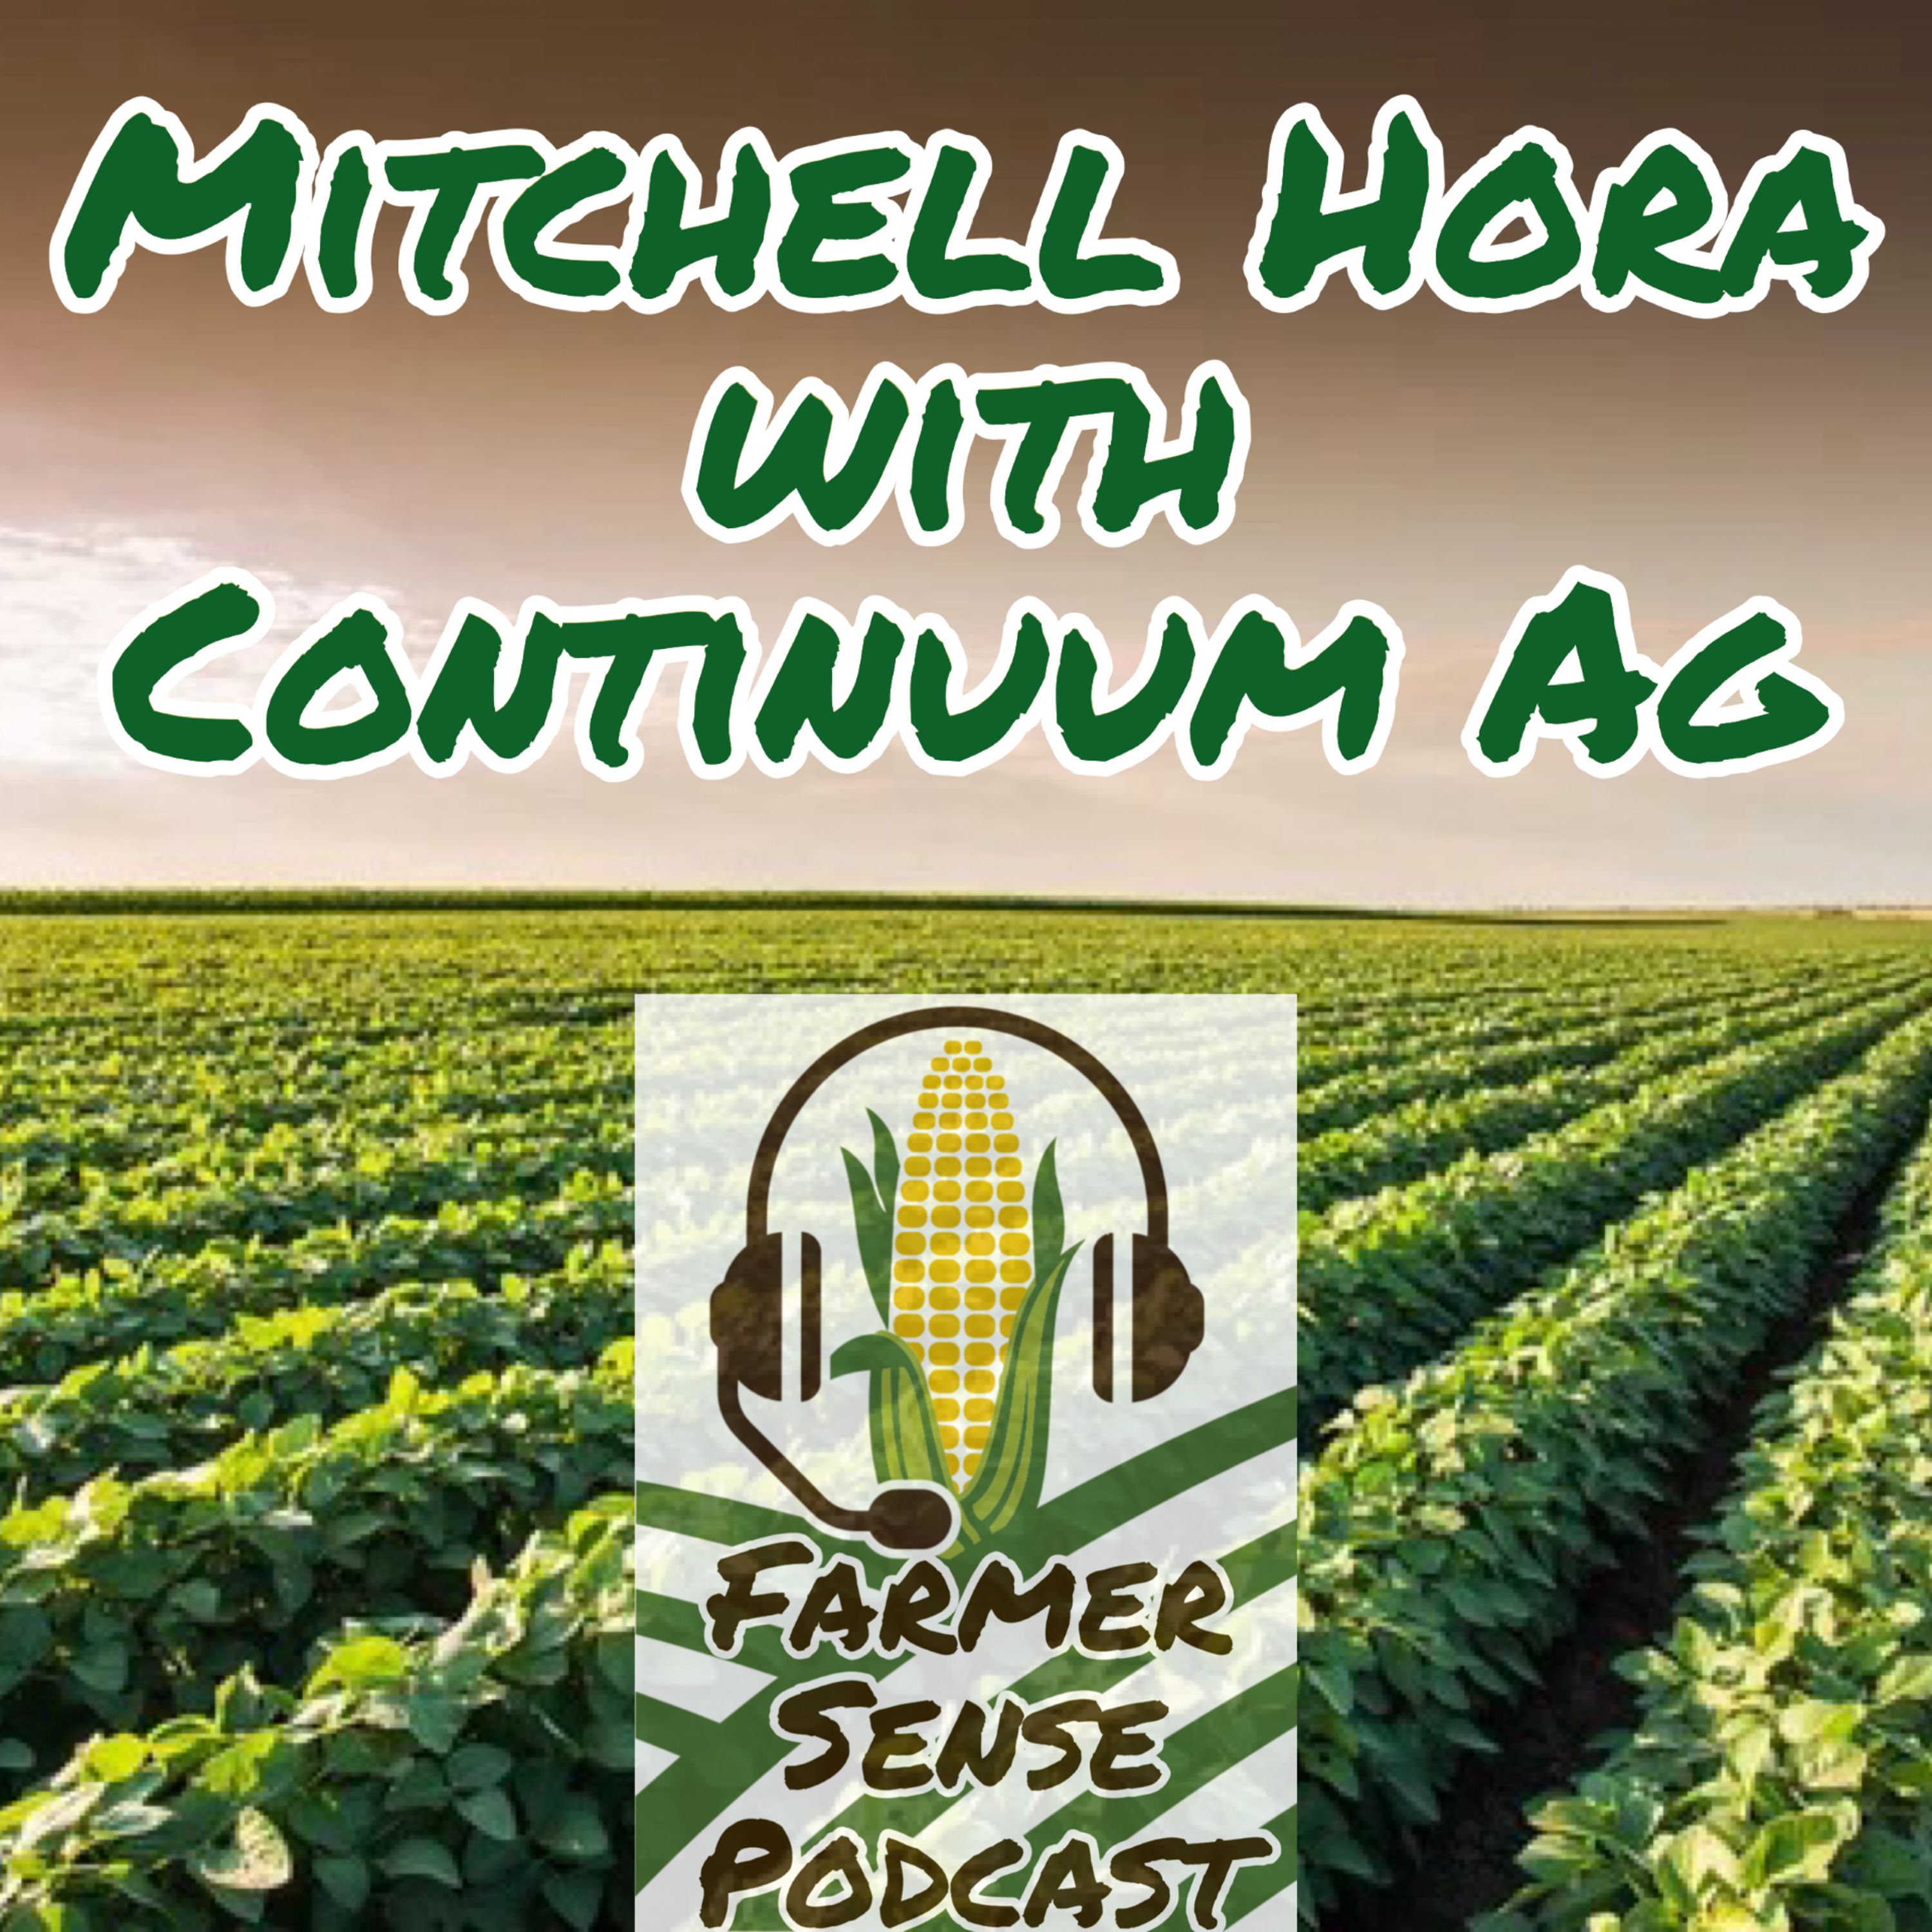 Mitchell Hora with Continuum Ag